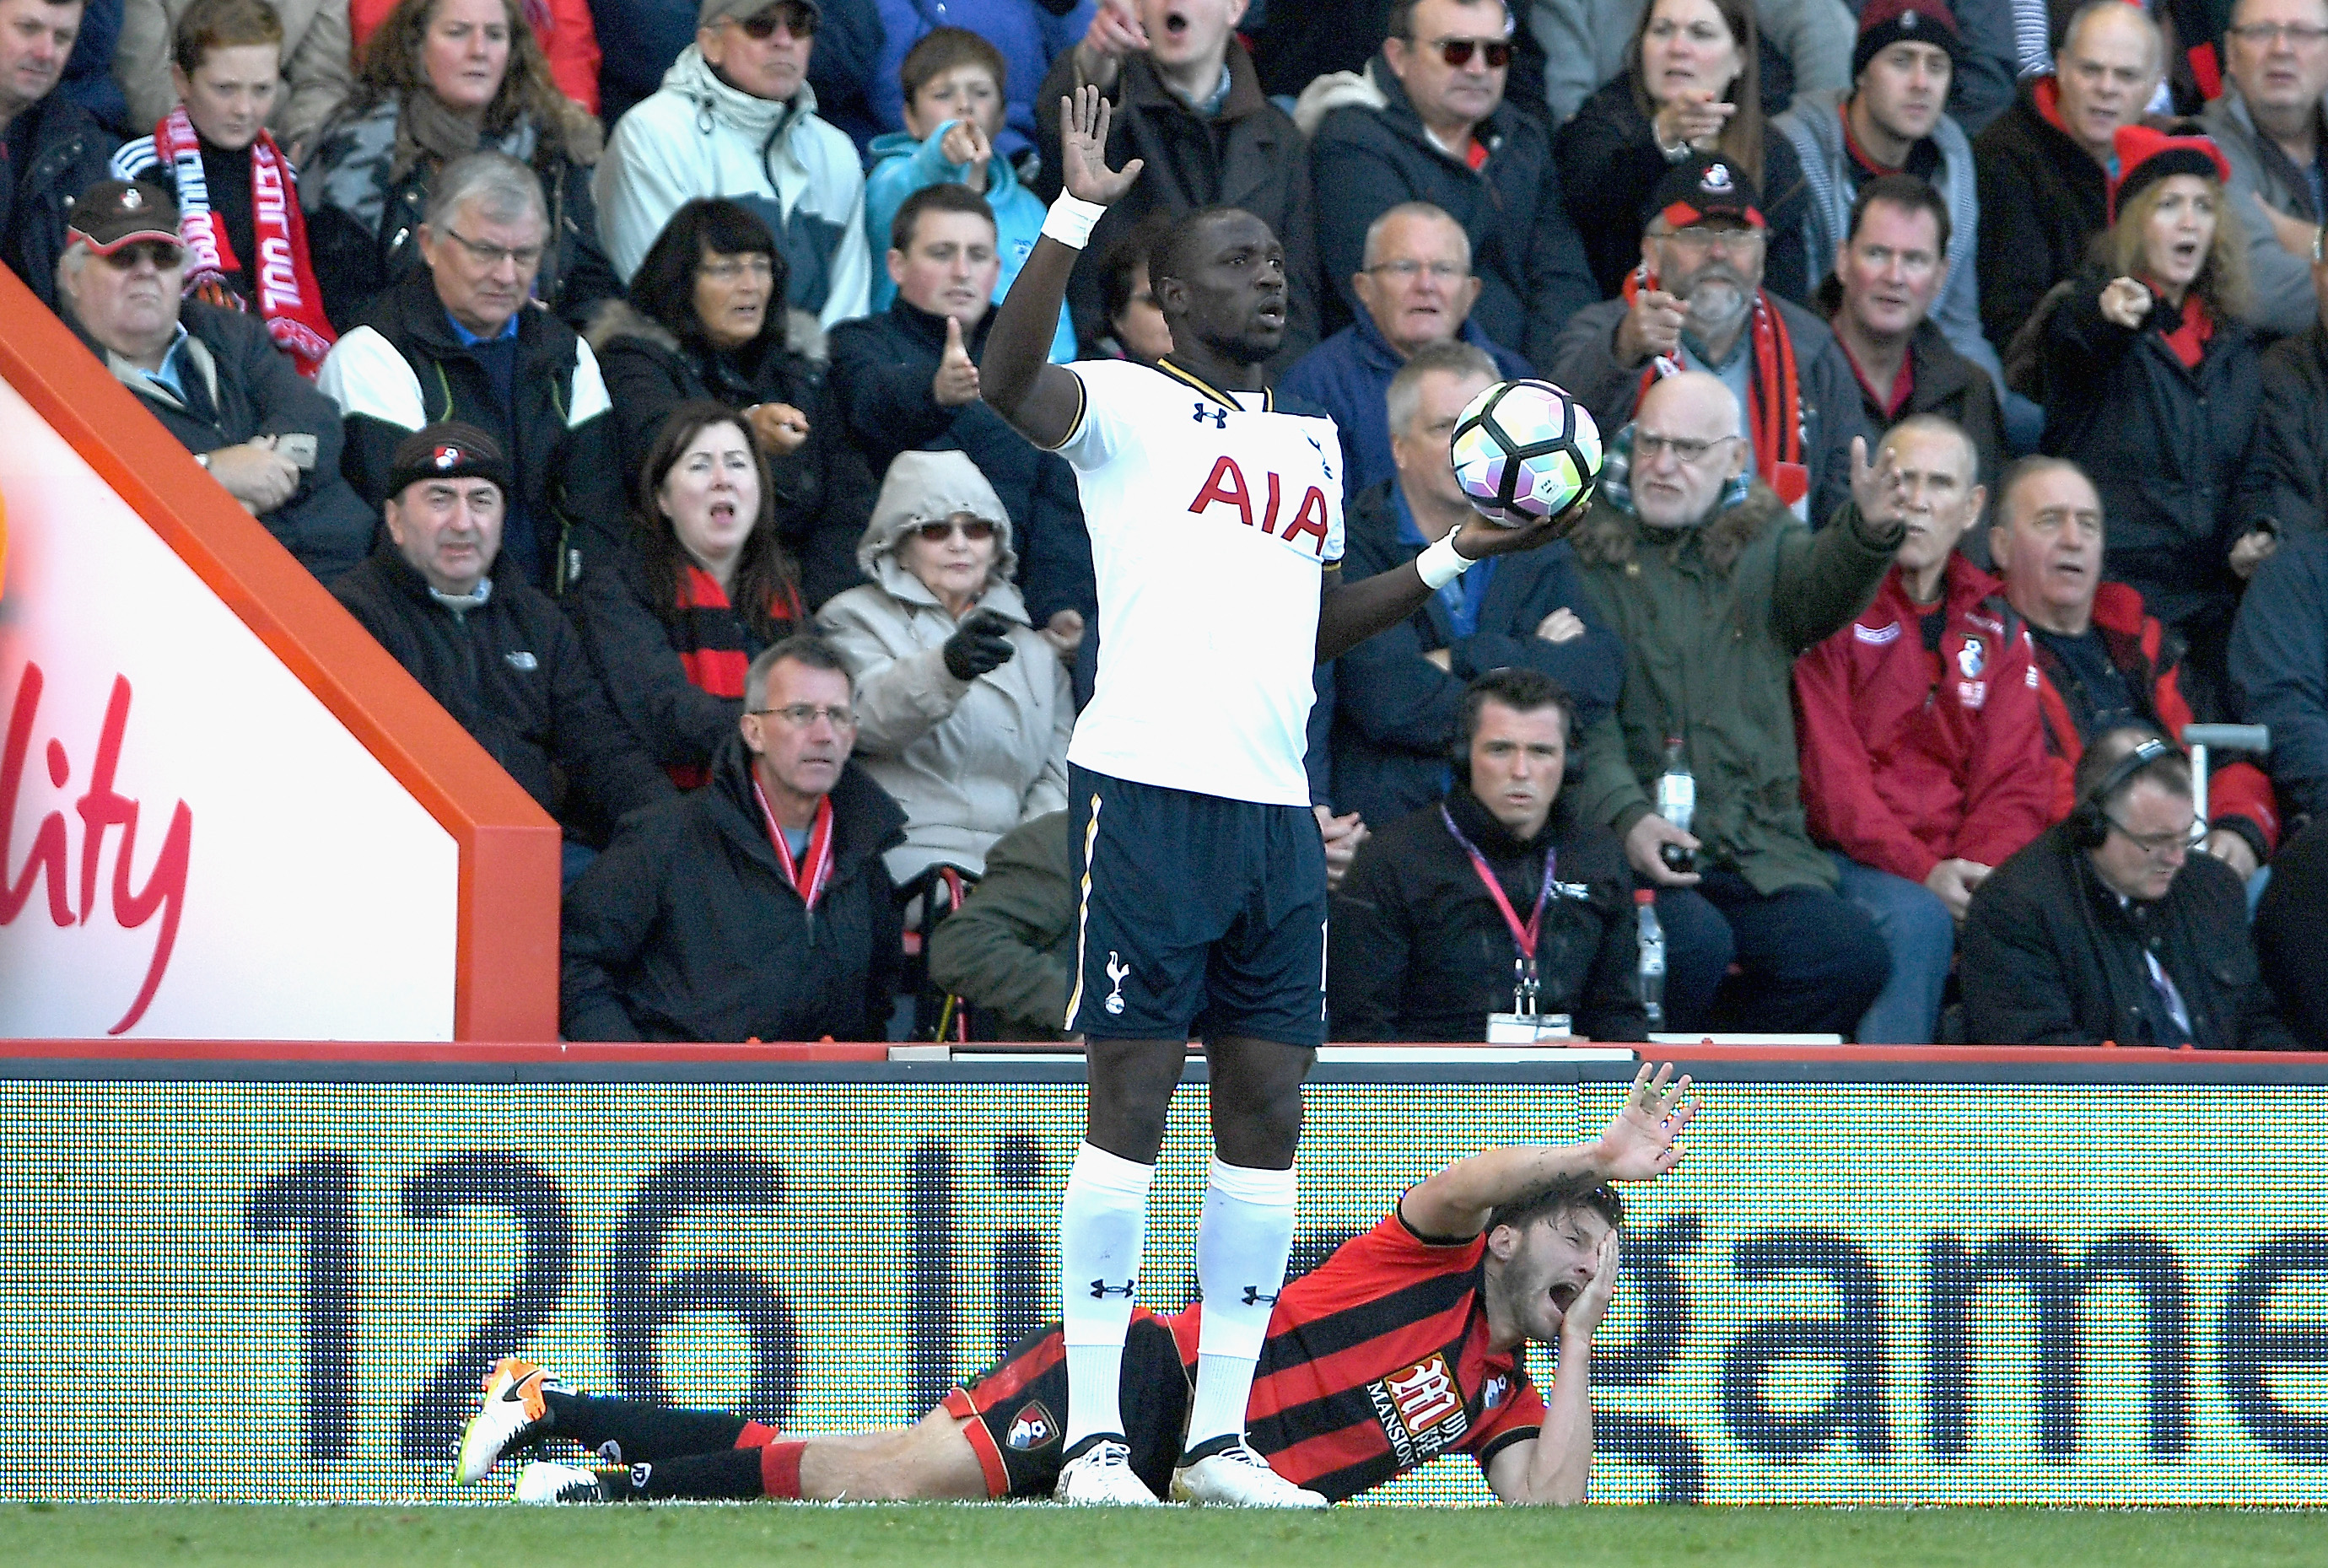 BOURNEMOUTH, ENGLAND - OCTOBER 22:  Harry Arter of AFC Bournemouth (R) reacts to being elbowed by Moussa Sissoko of Tottenham Hotspur (L) during the Premier League match between AFC Bournemouth and Tottenham Hotspur at Vitality Stadium on October 22, 2016 in Bournemouth, England.  (Photo by Mike Hewitt/Getty Images)